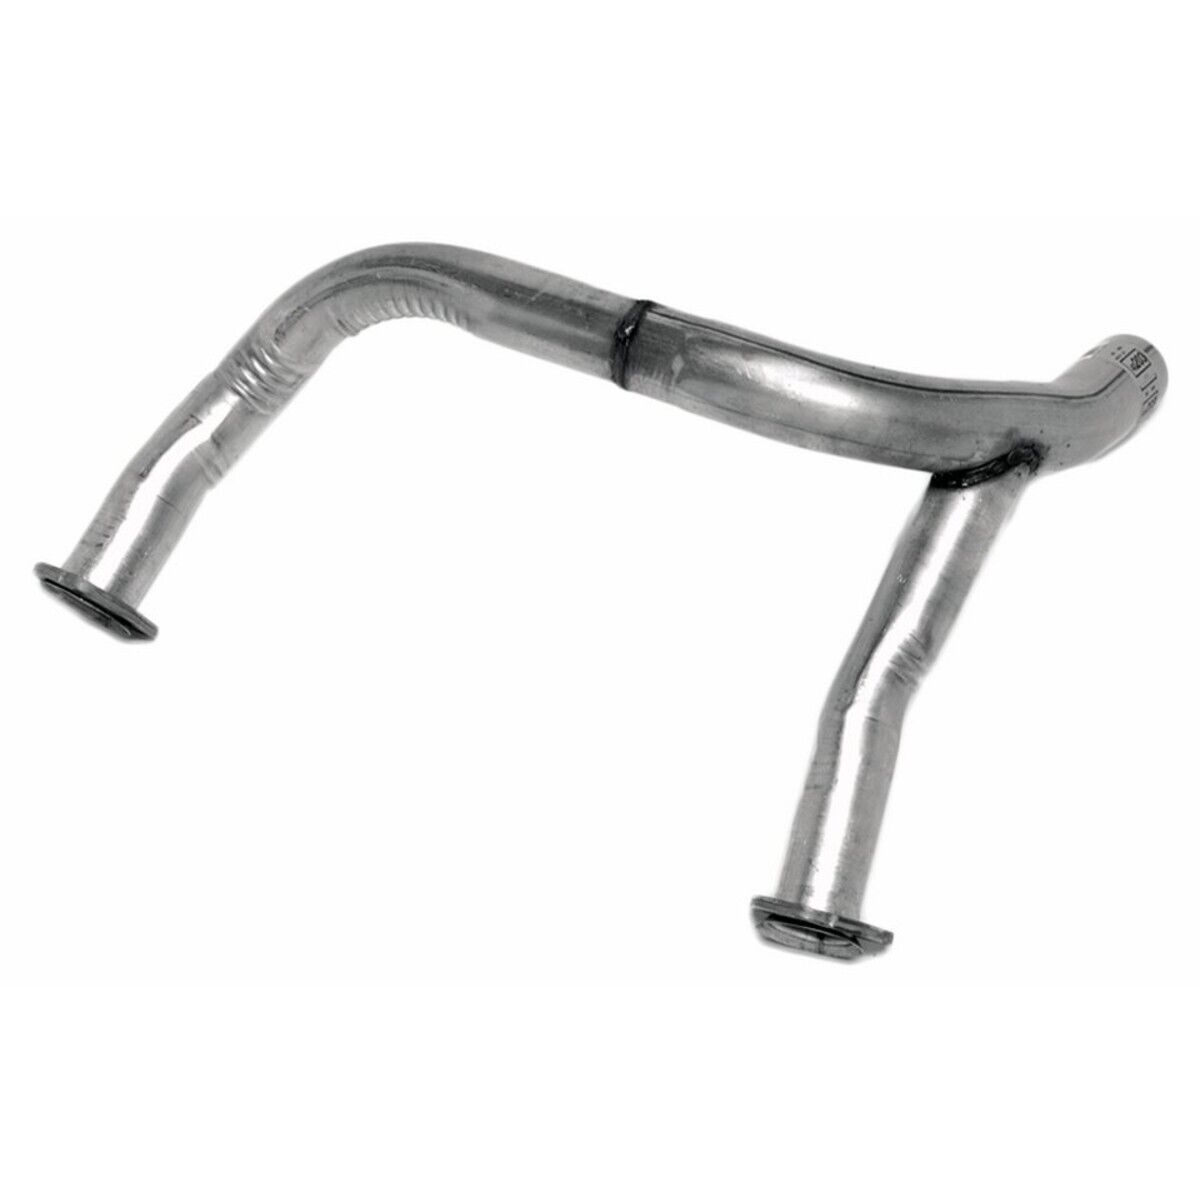 40203 Walker Exhaust Pipe for Chevy S10 Pickup S15 Chevrolet S-10 GMC 1988-1990